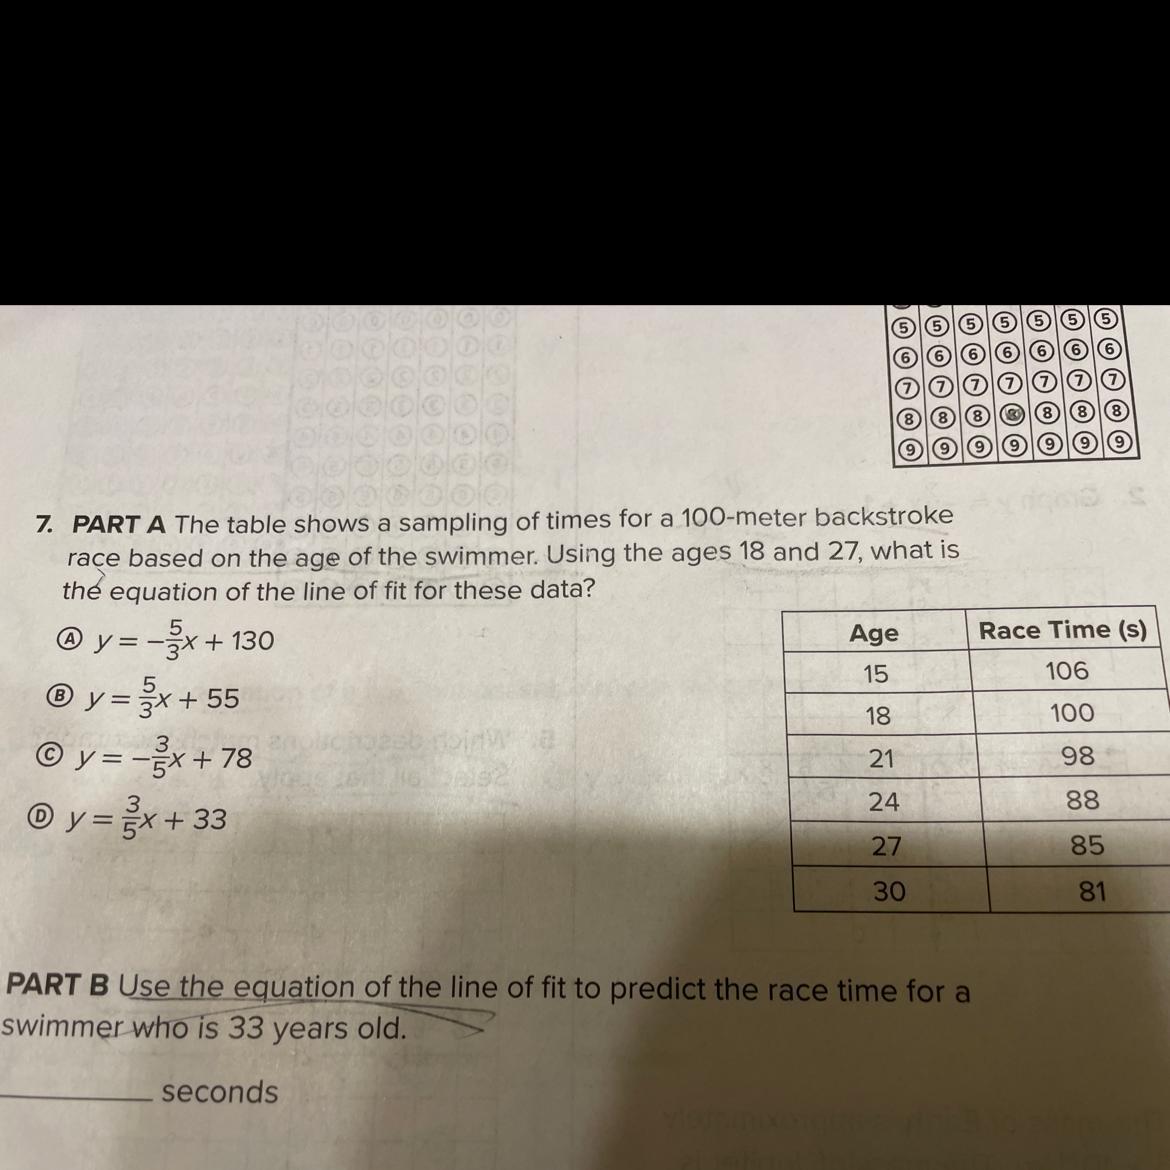 Number 7. I Dont Understand, Whats The Fraction? How Do You Get Fraction And The + A Number.